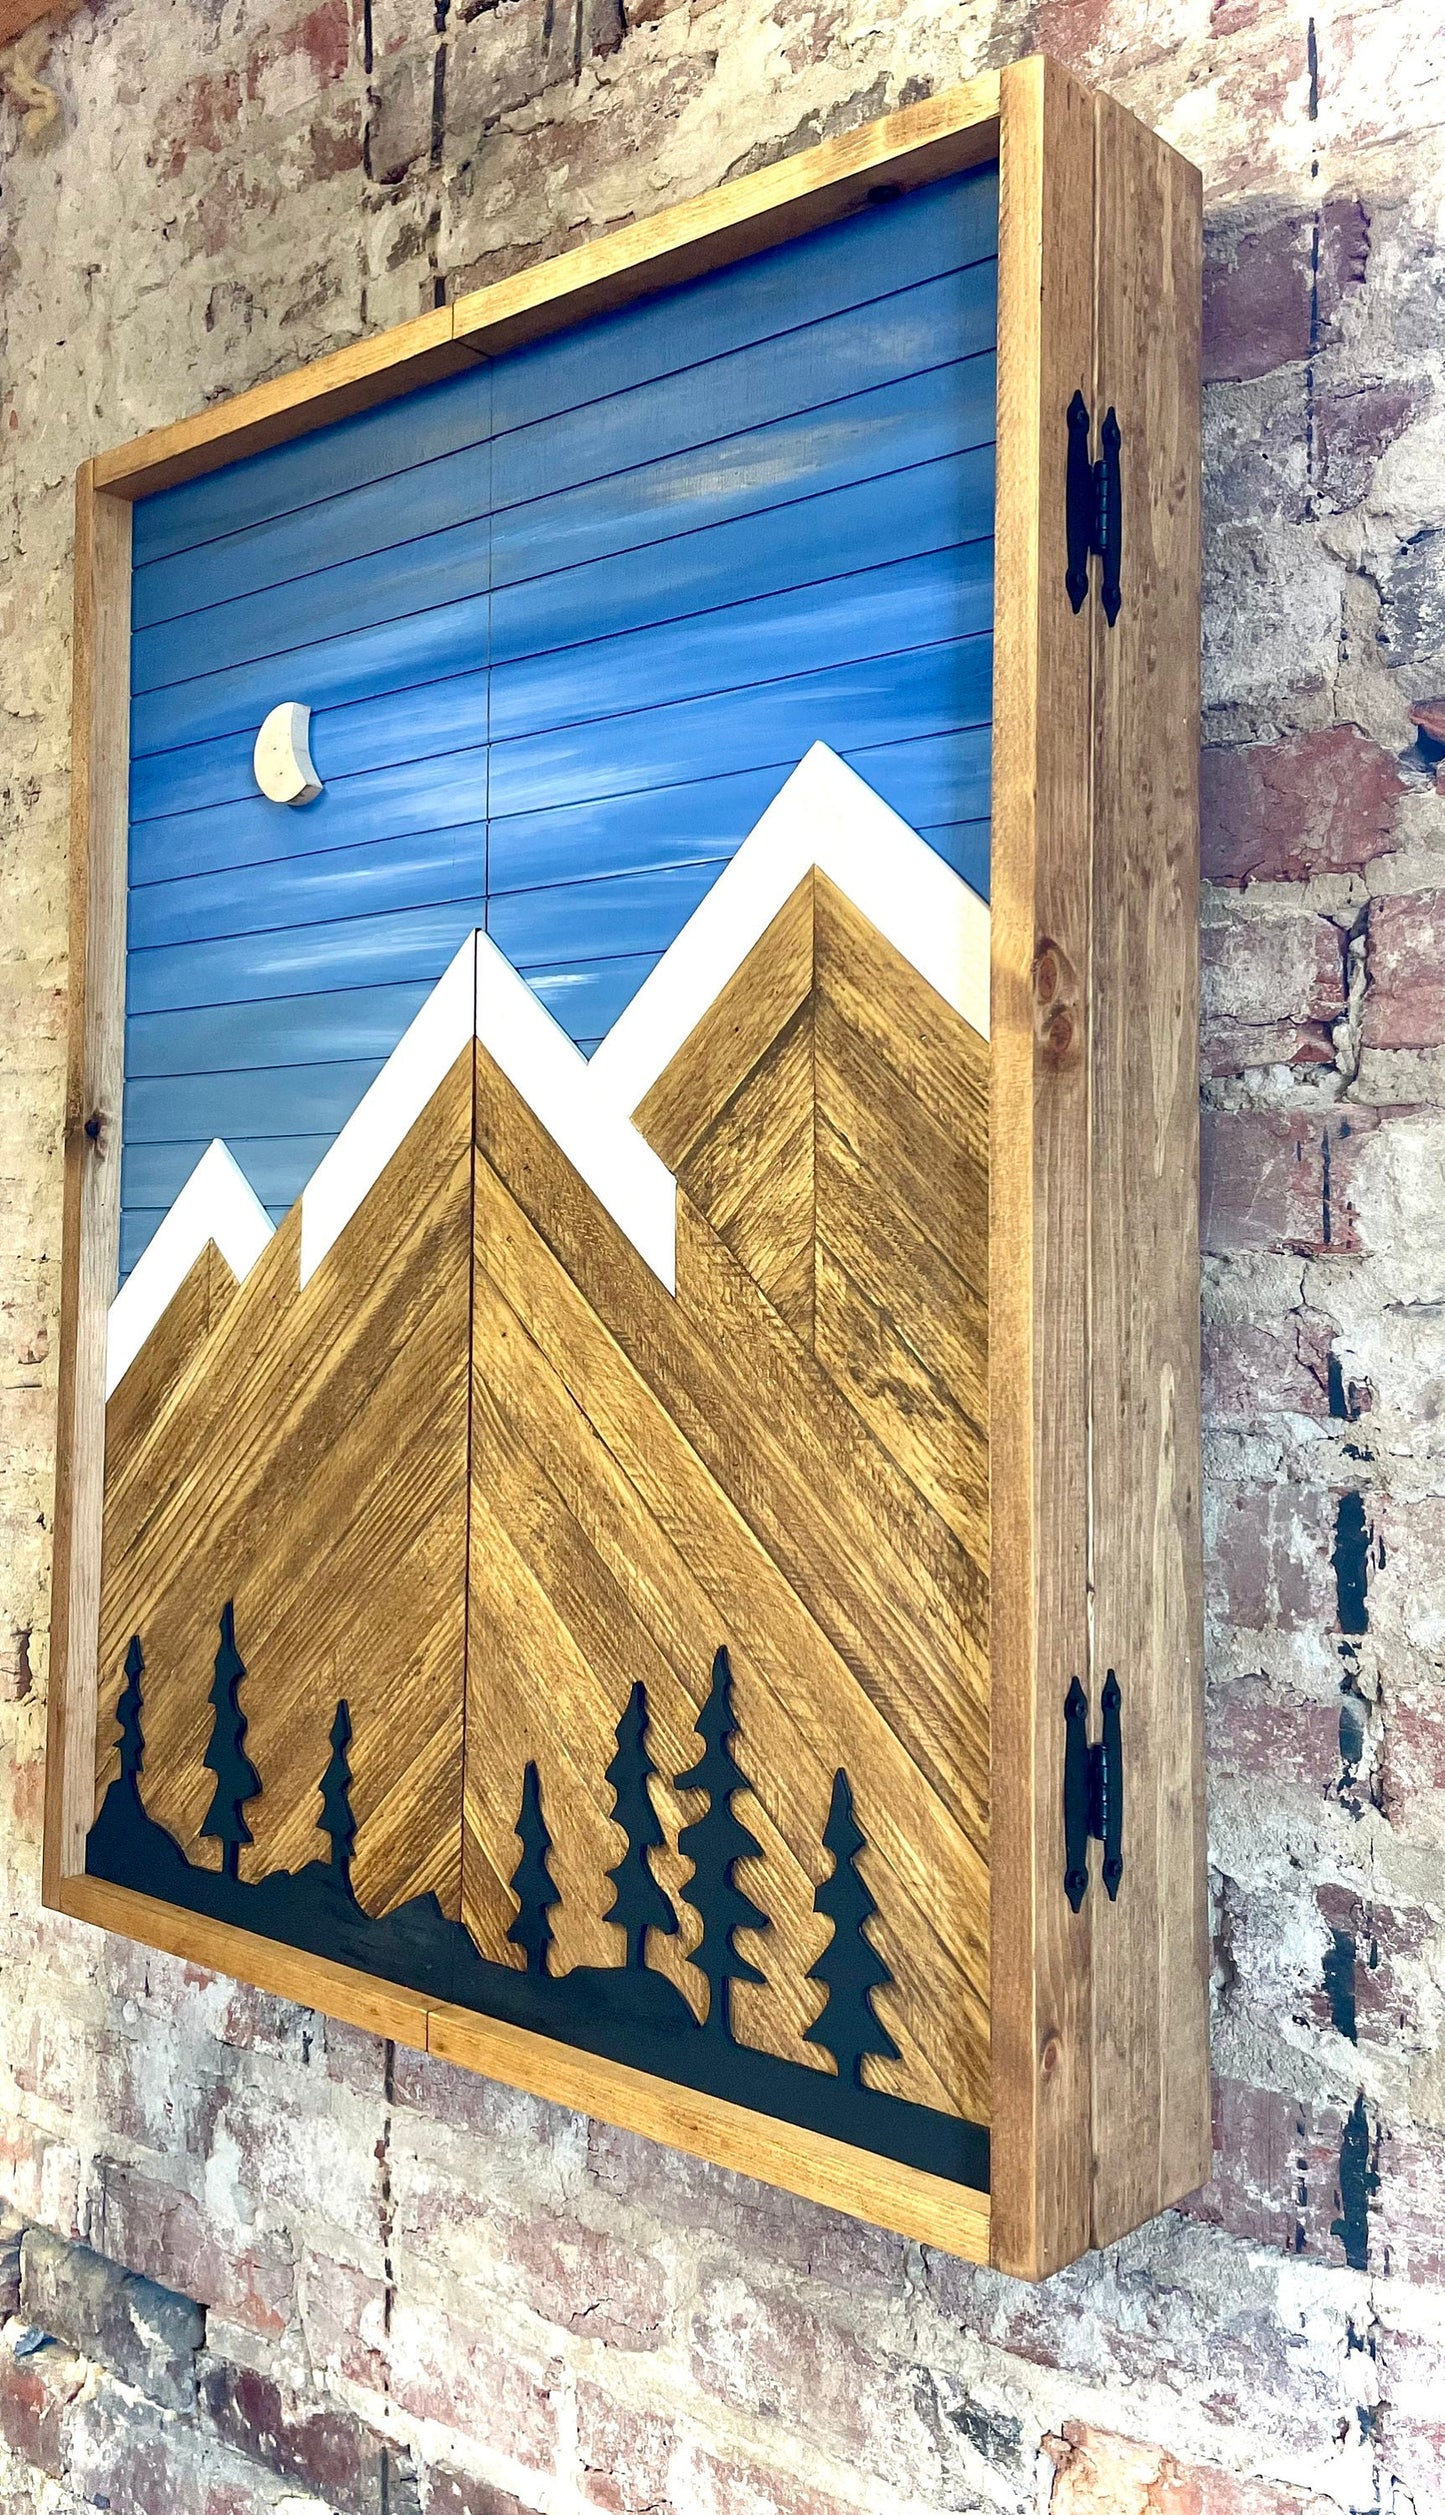 Rustic Electronic Dartboard Cabinet - Rustic Blue Sky w/ Trees Mountain Art  33”x26” - Rustic Cabinet - Game Room / Man Cave Art -Wall Decor